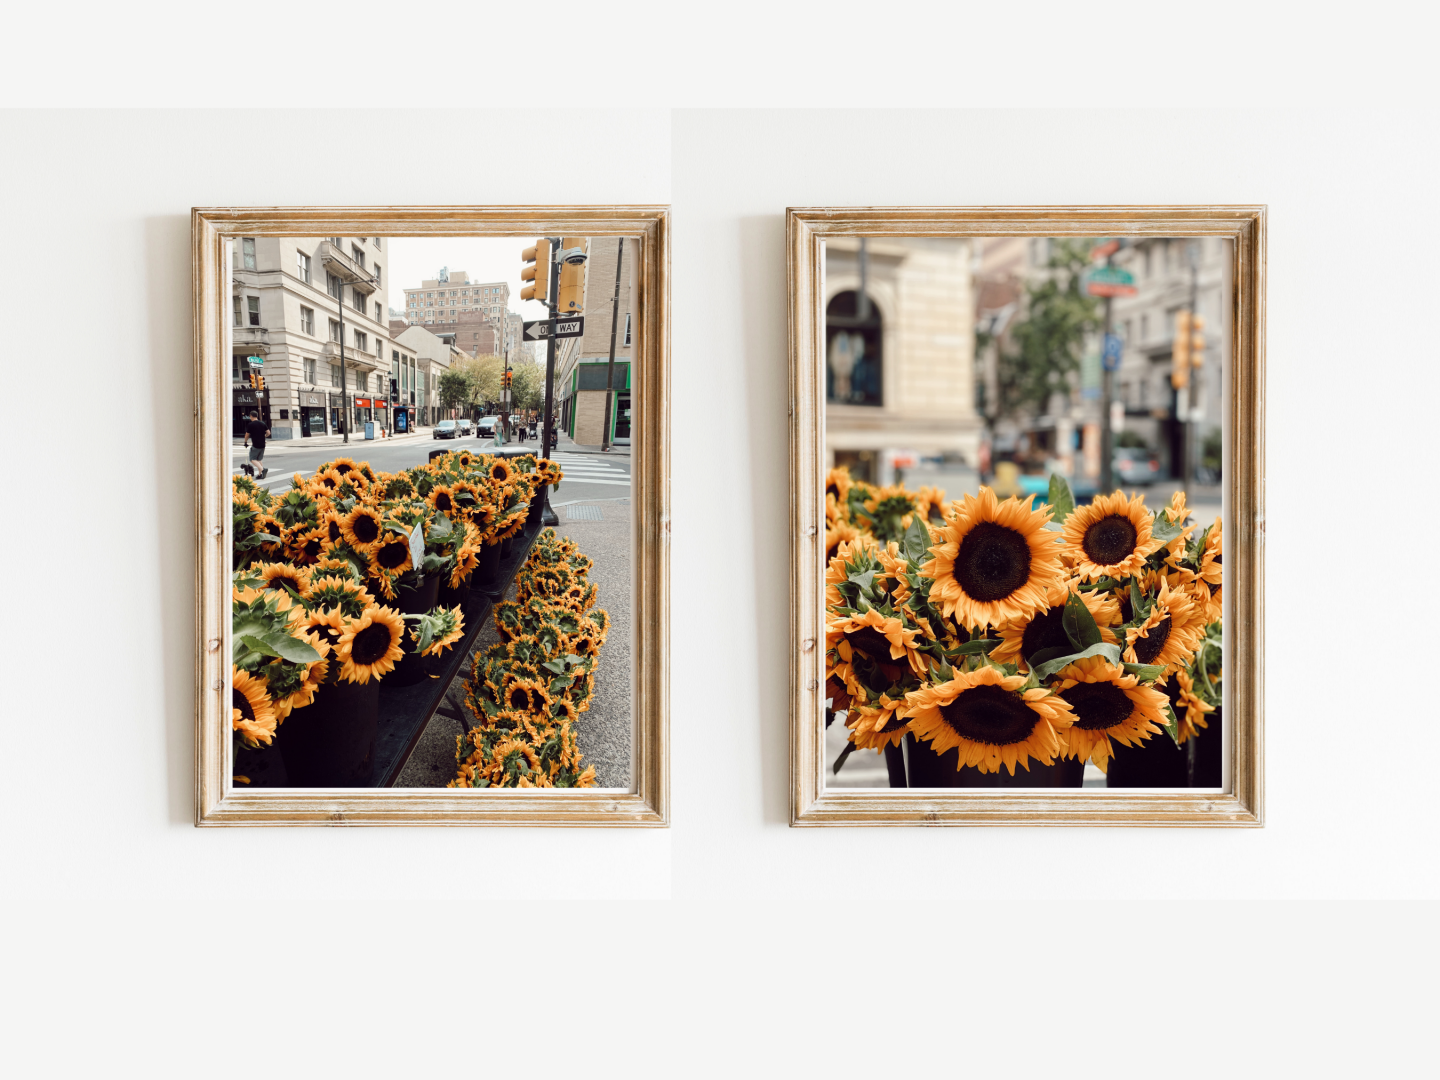 oldcitylove prints on etsy two framed prints of yellow sunflowers